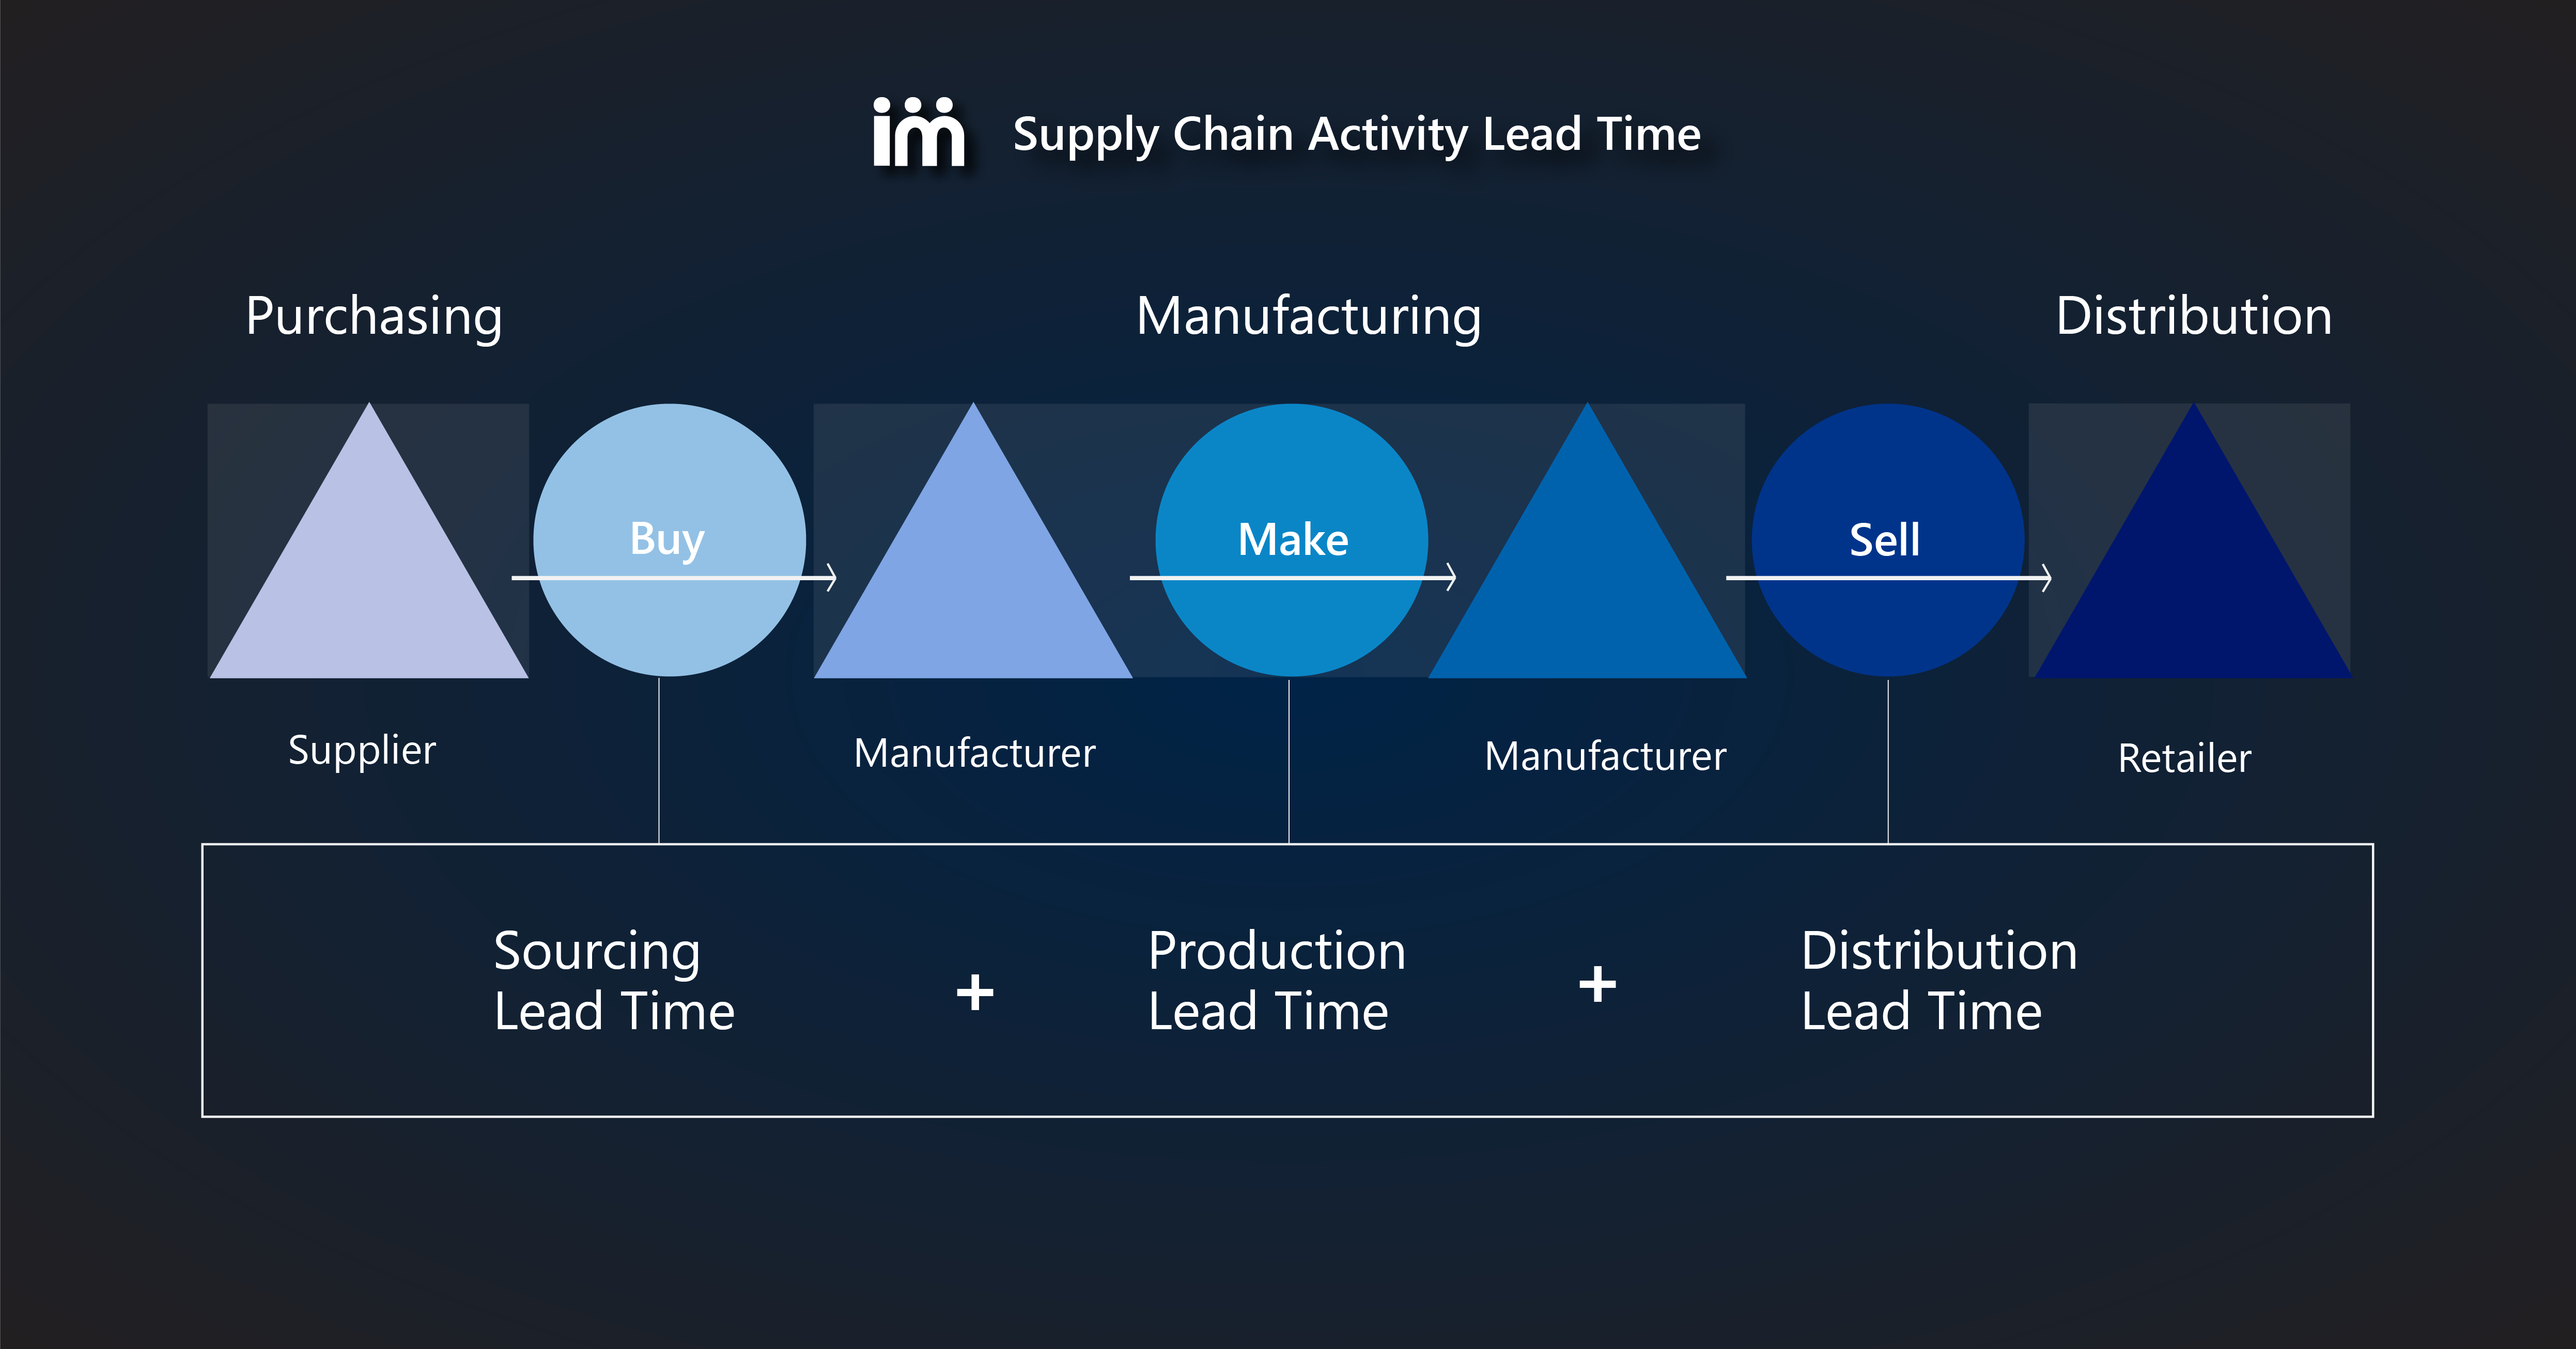 Supply Chain Activity Lead Time